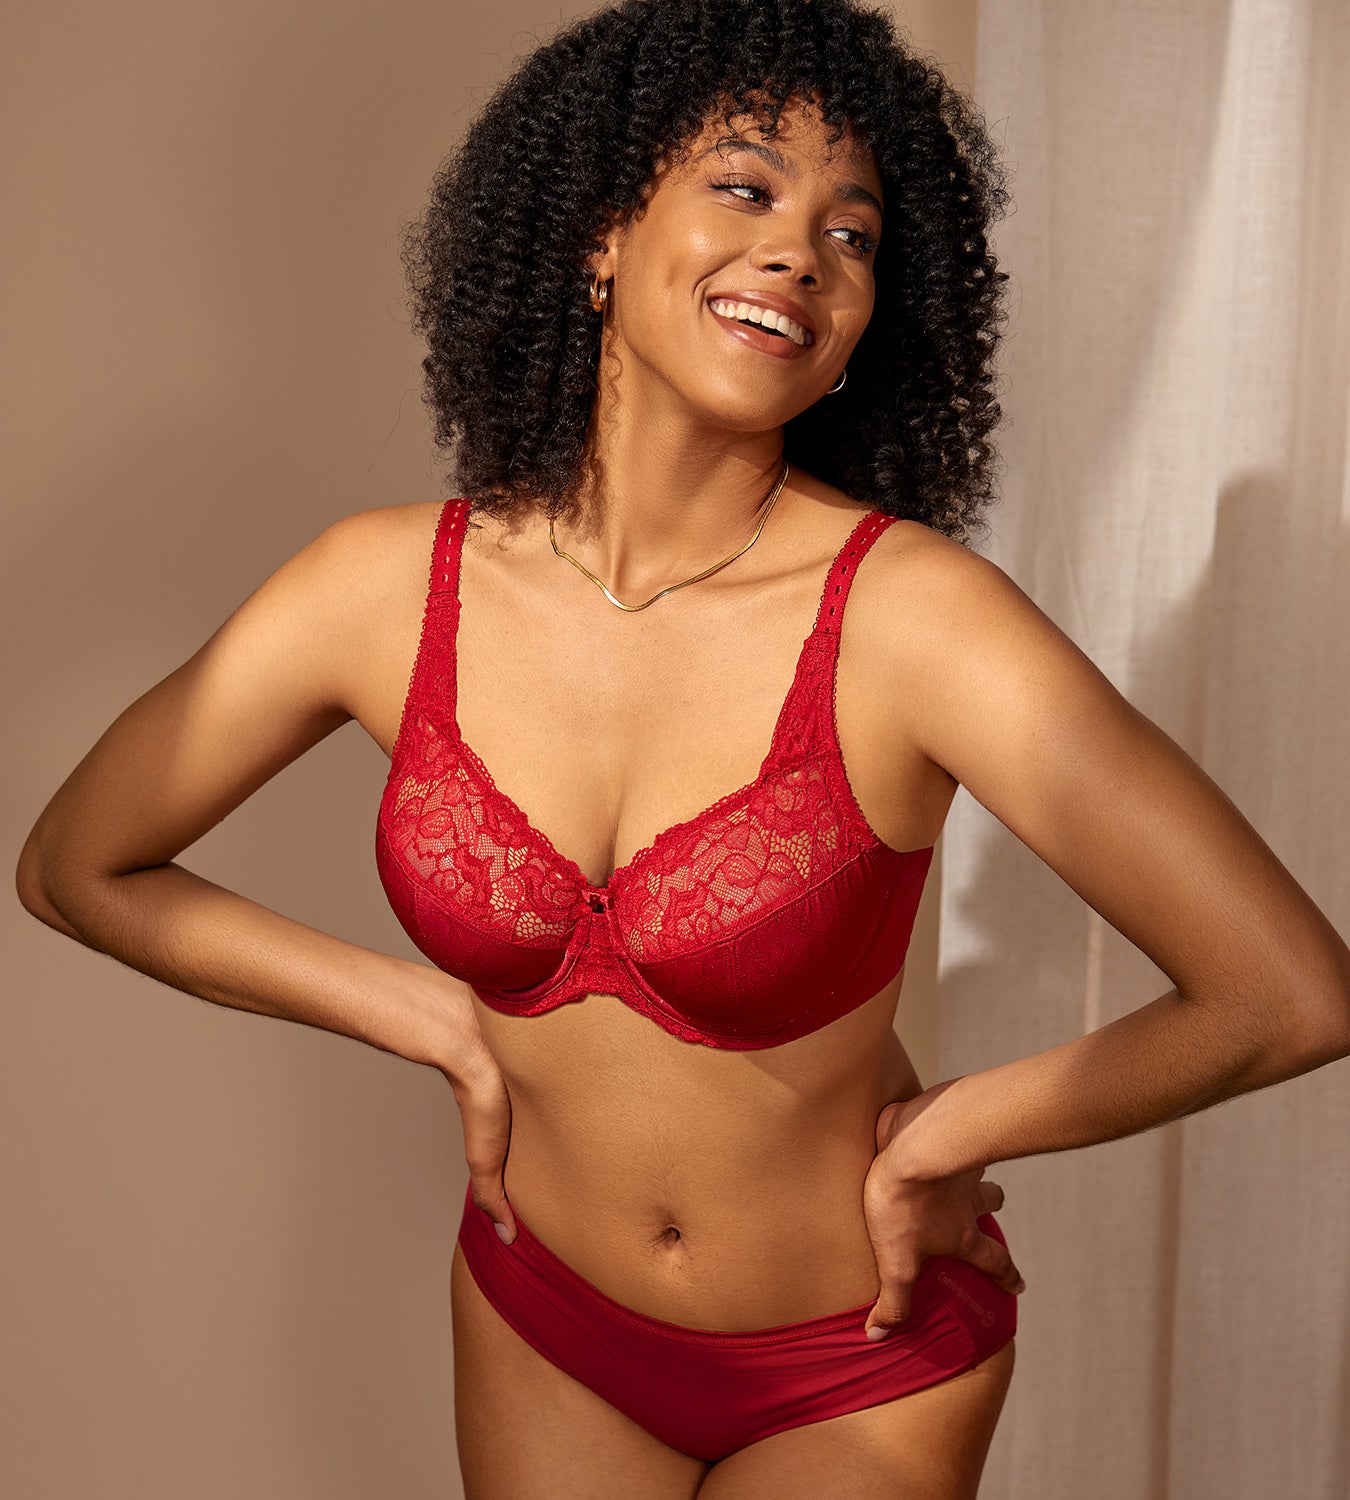 Beauty Lace Non Padded Underwire Bra